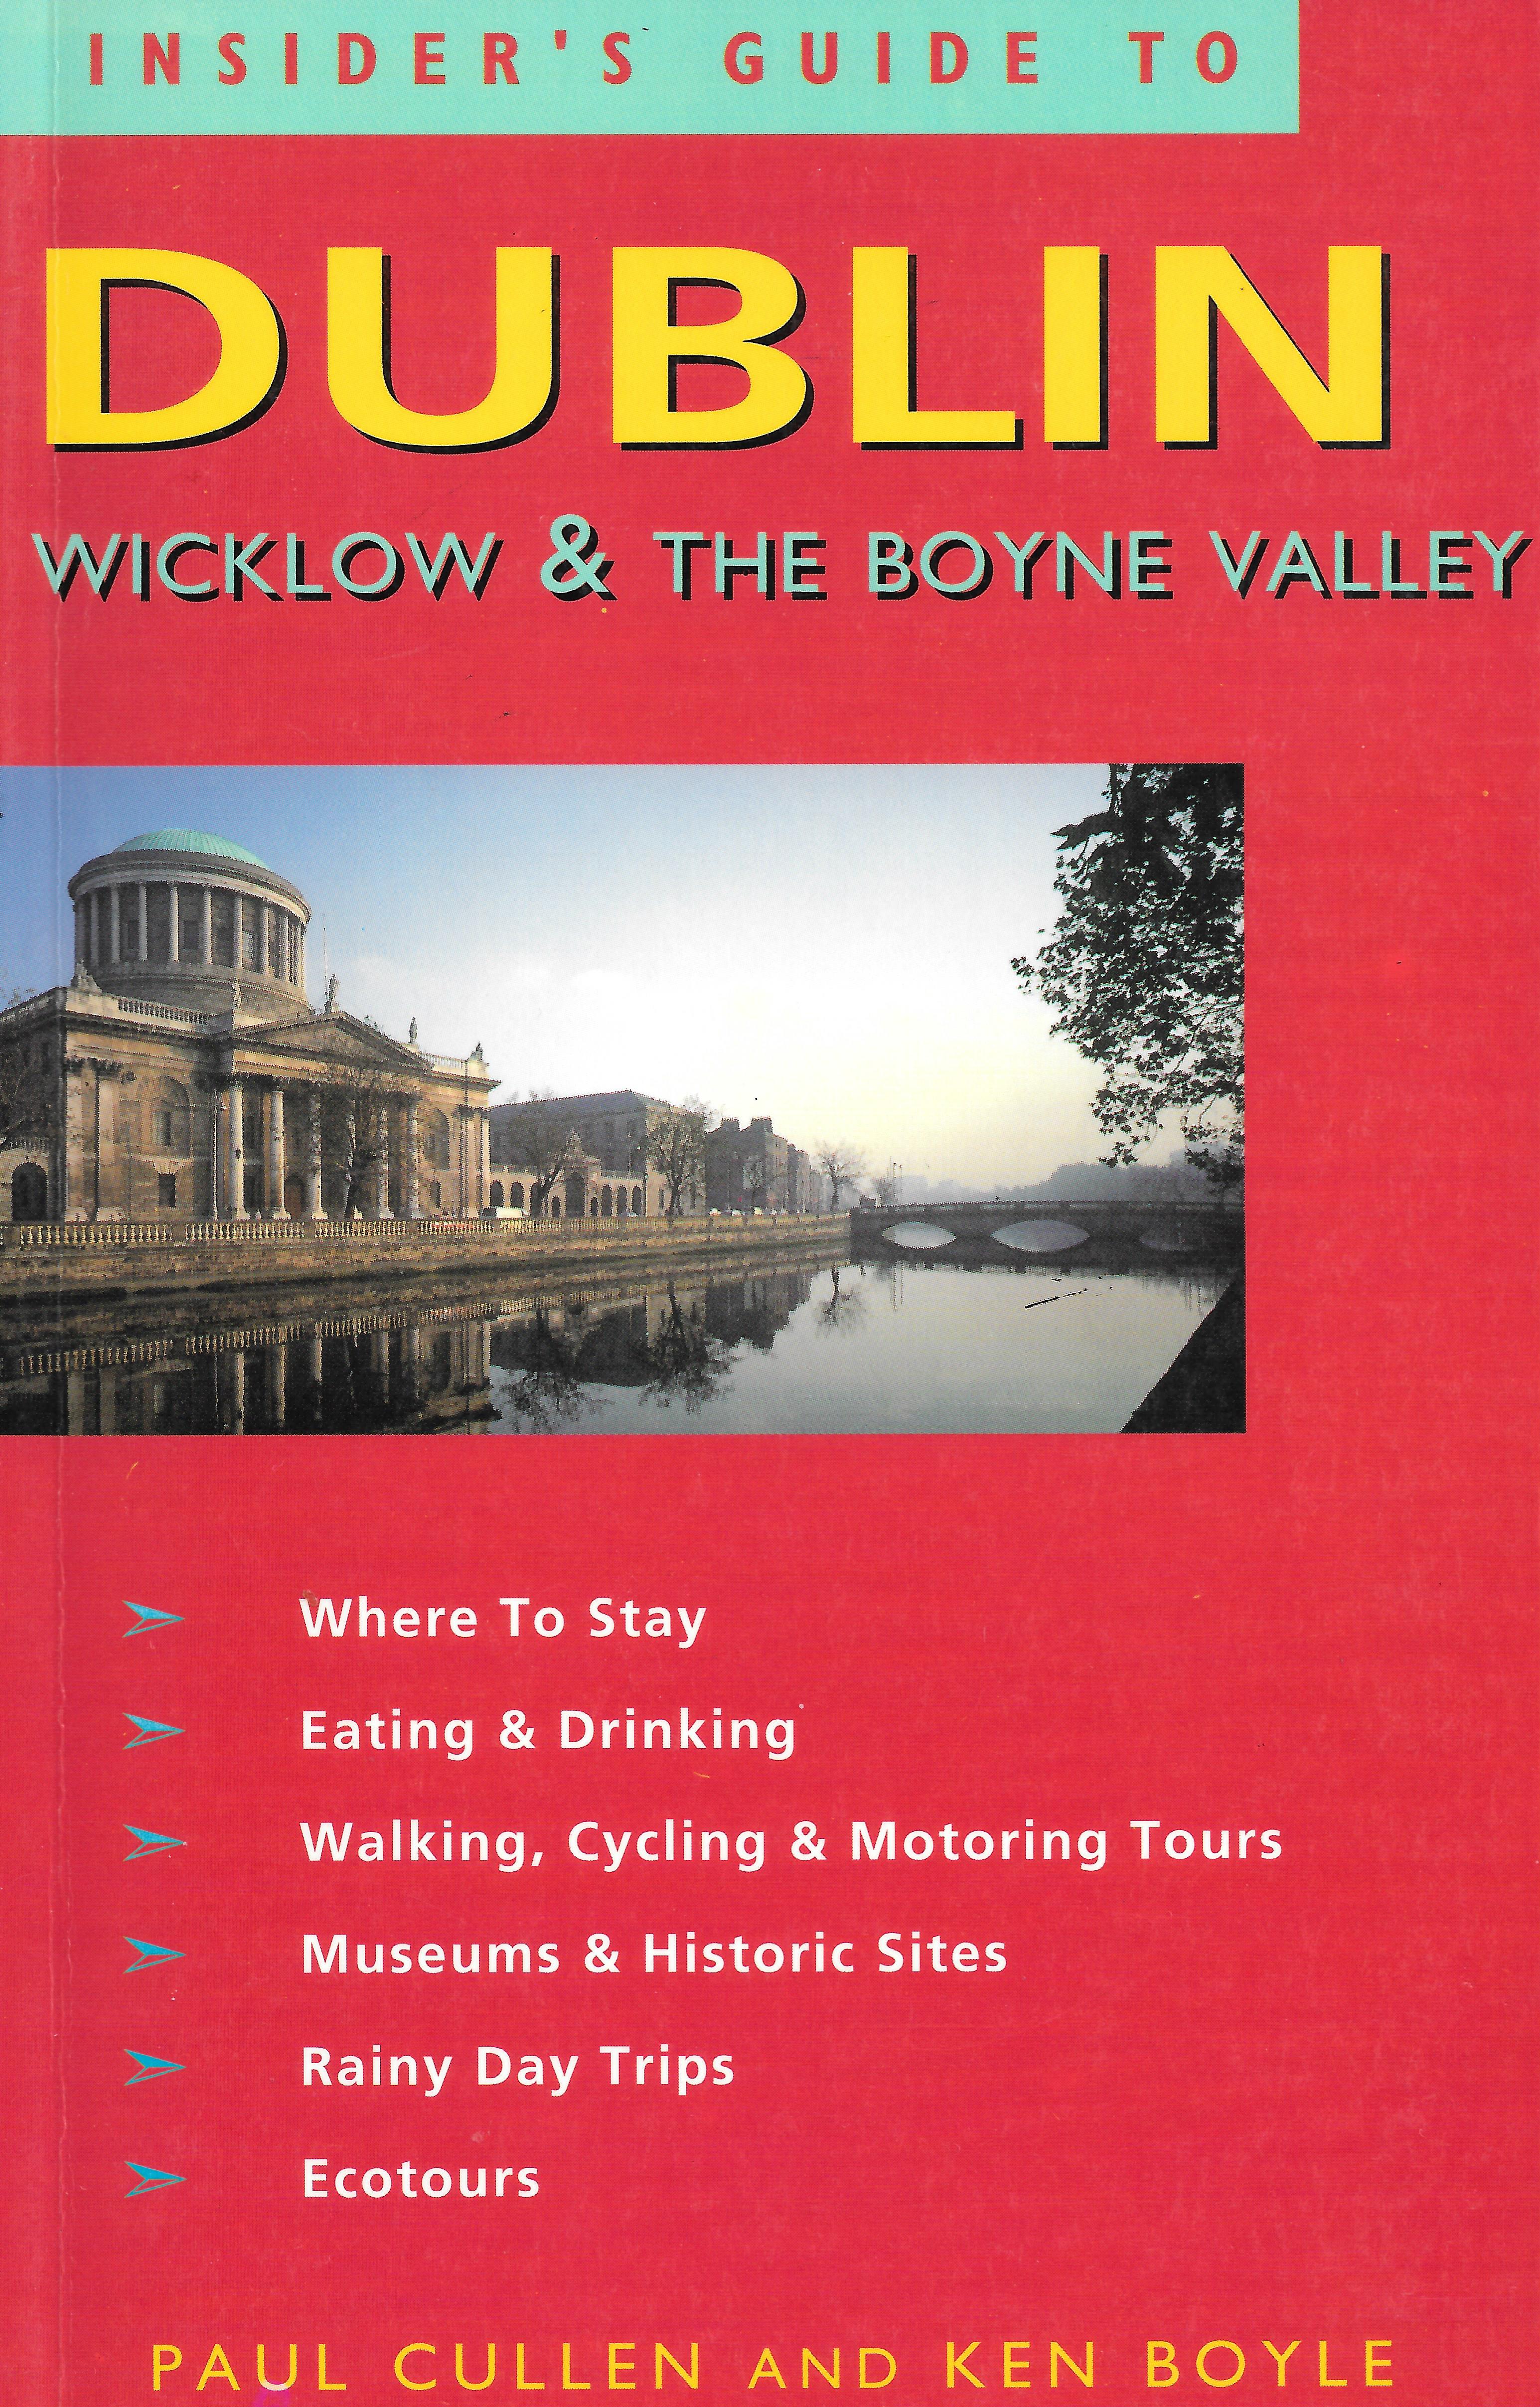 Insider's Guide to Dublin, Wicklow and the Boyne Valley (1994)